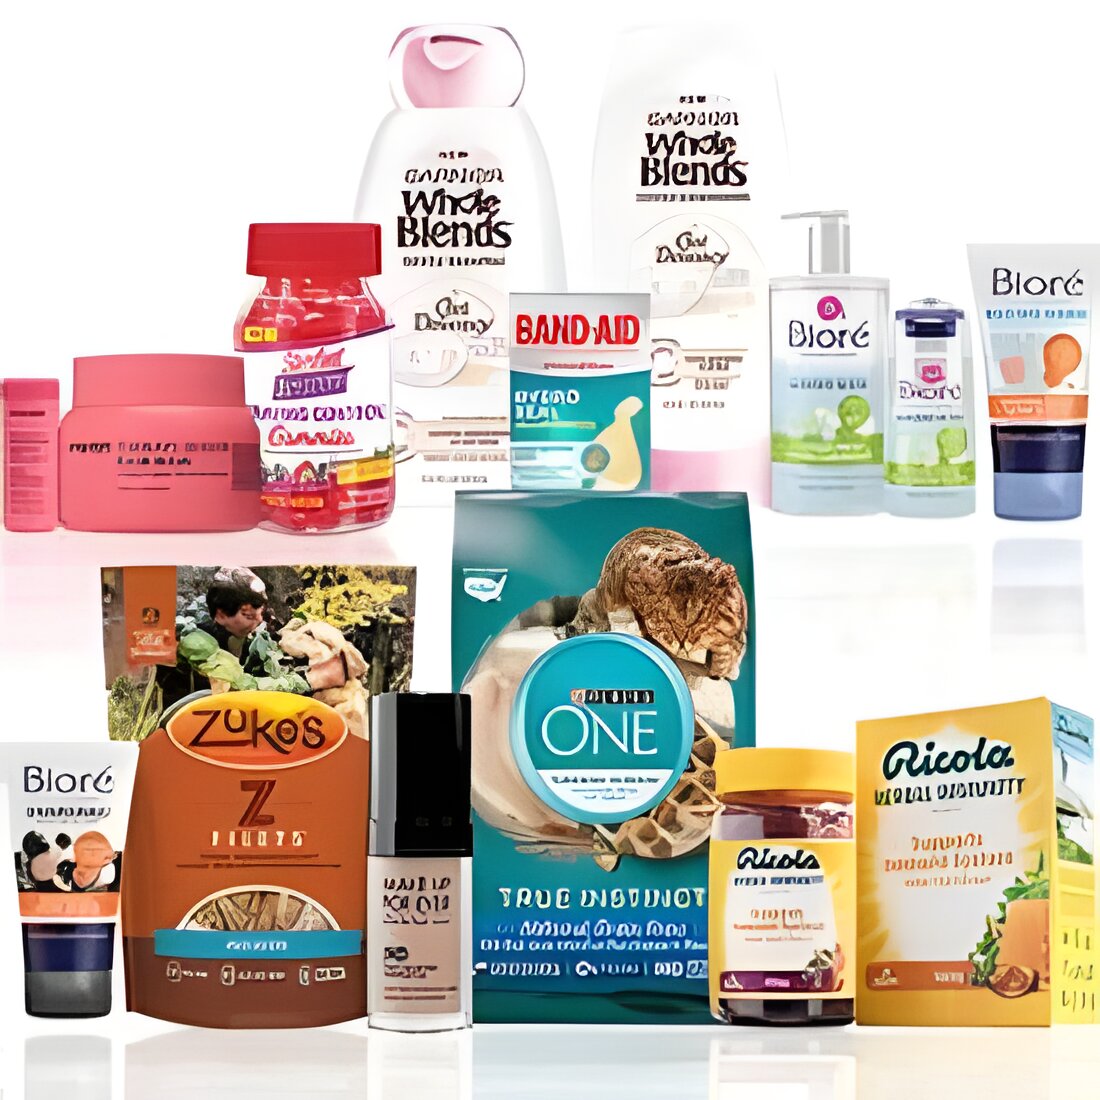 Free Sample Box from PINCHme